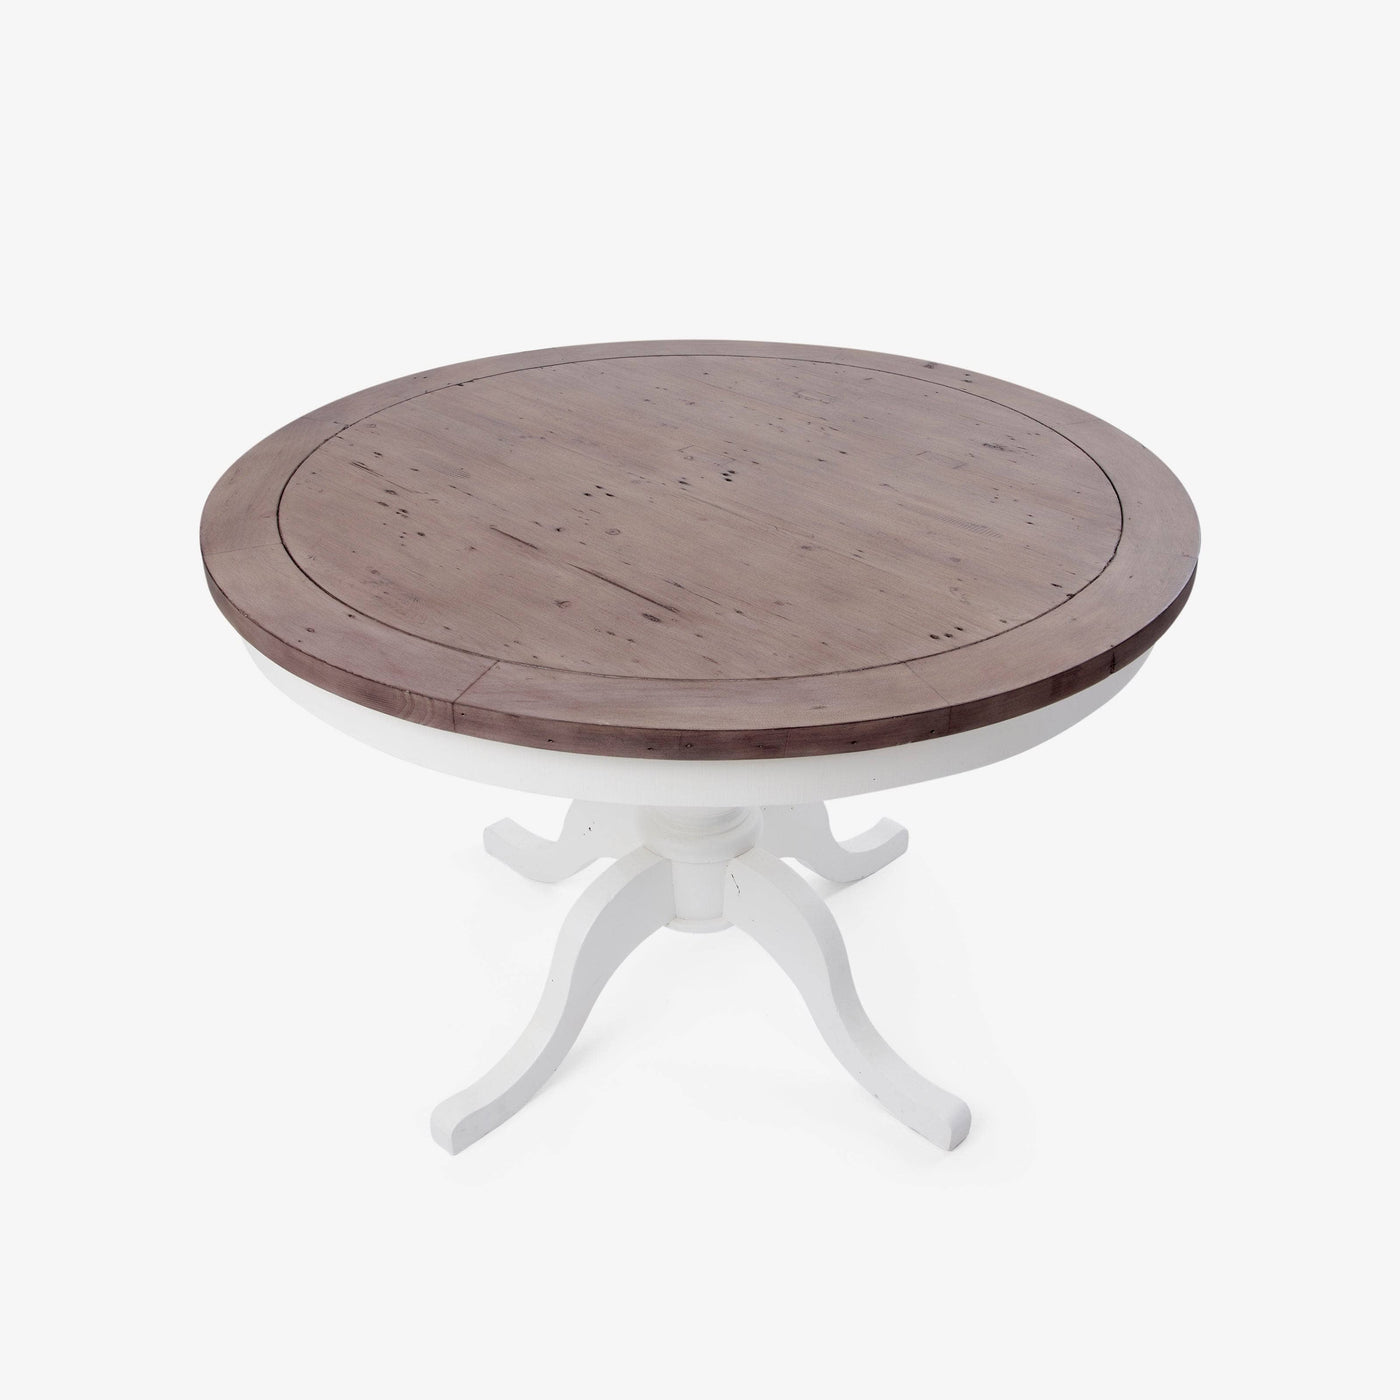 Atwood Round Dining Table, Brown Dining Tables sazy.com